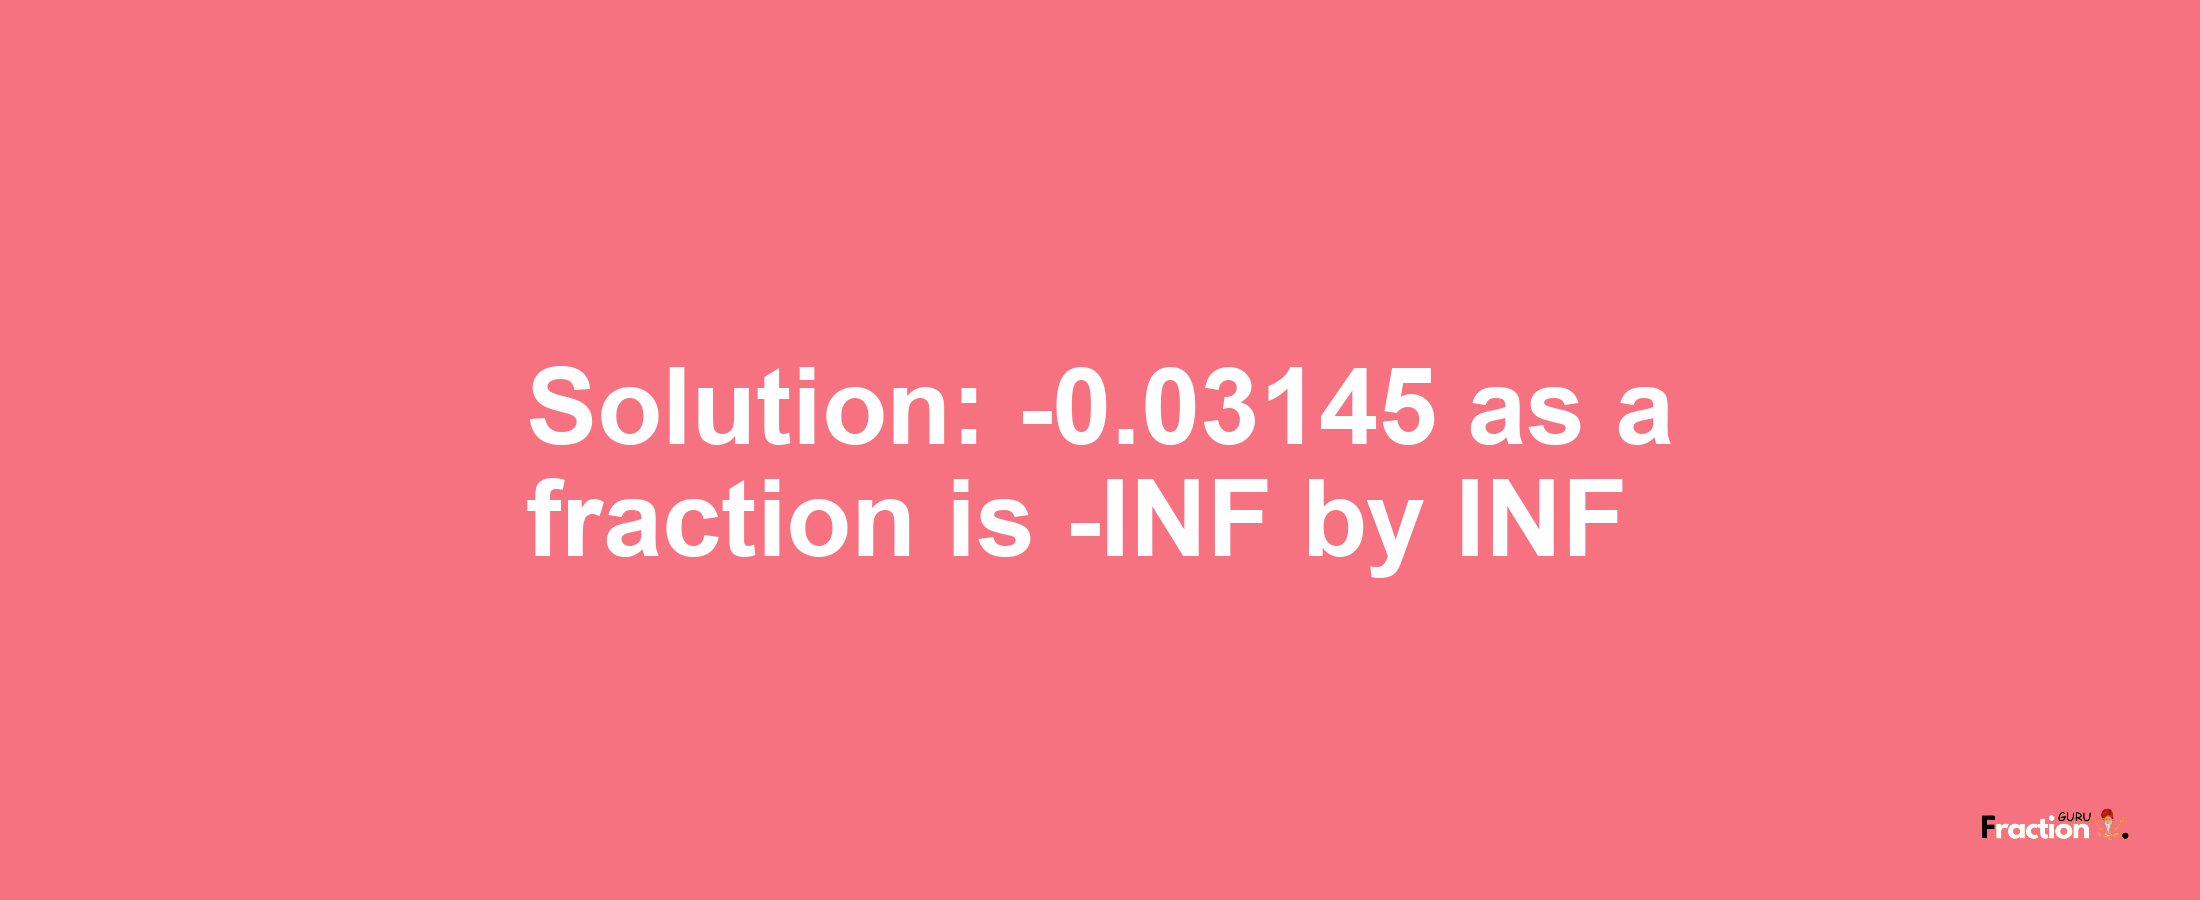 Solution:-0.03145 as a fraction is -INF/INF